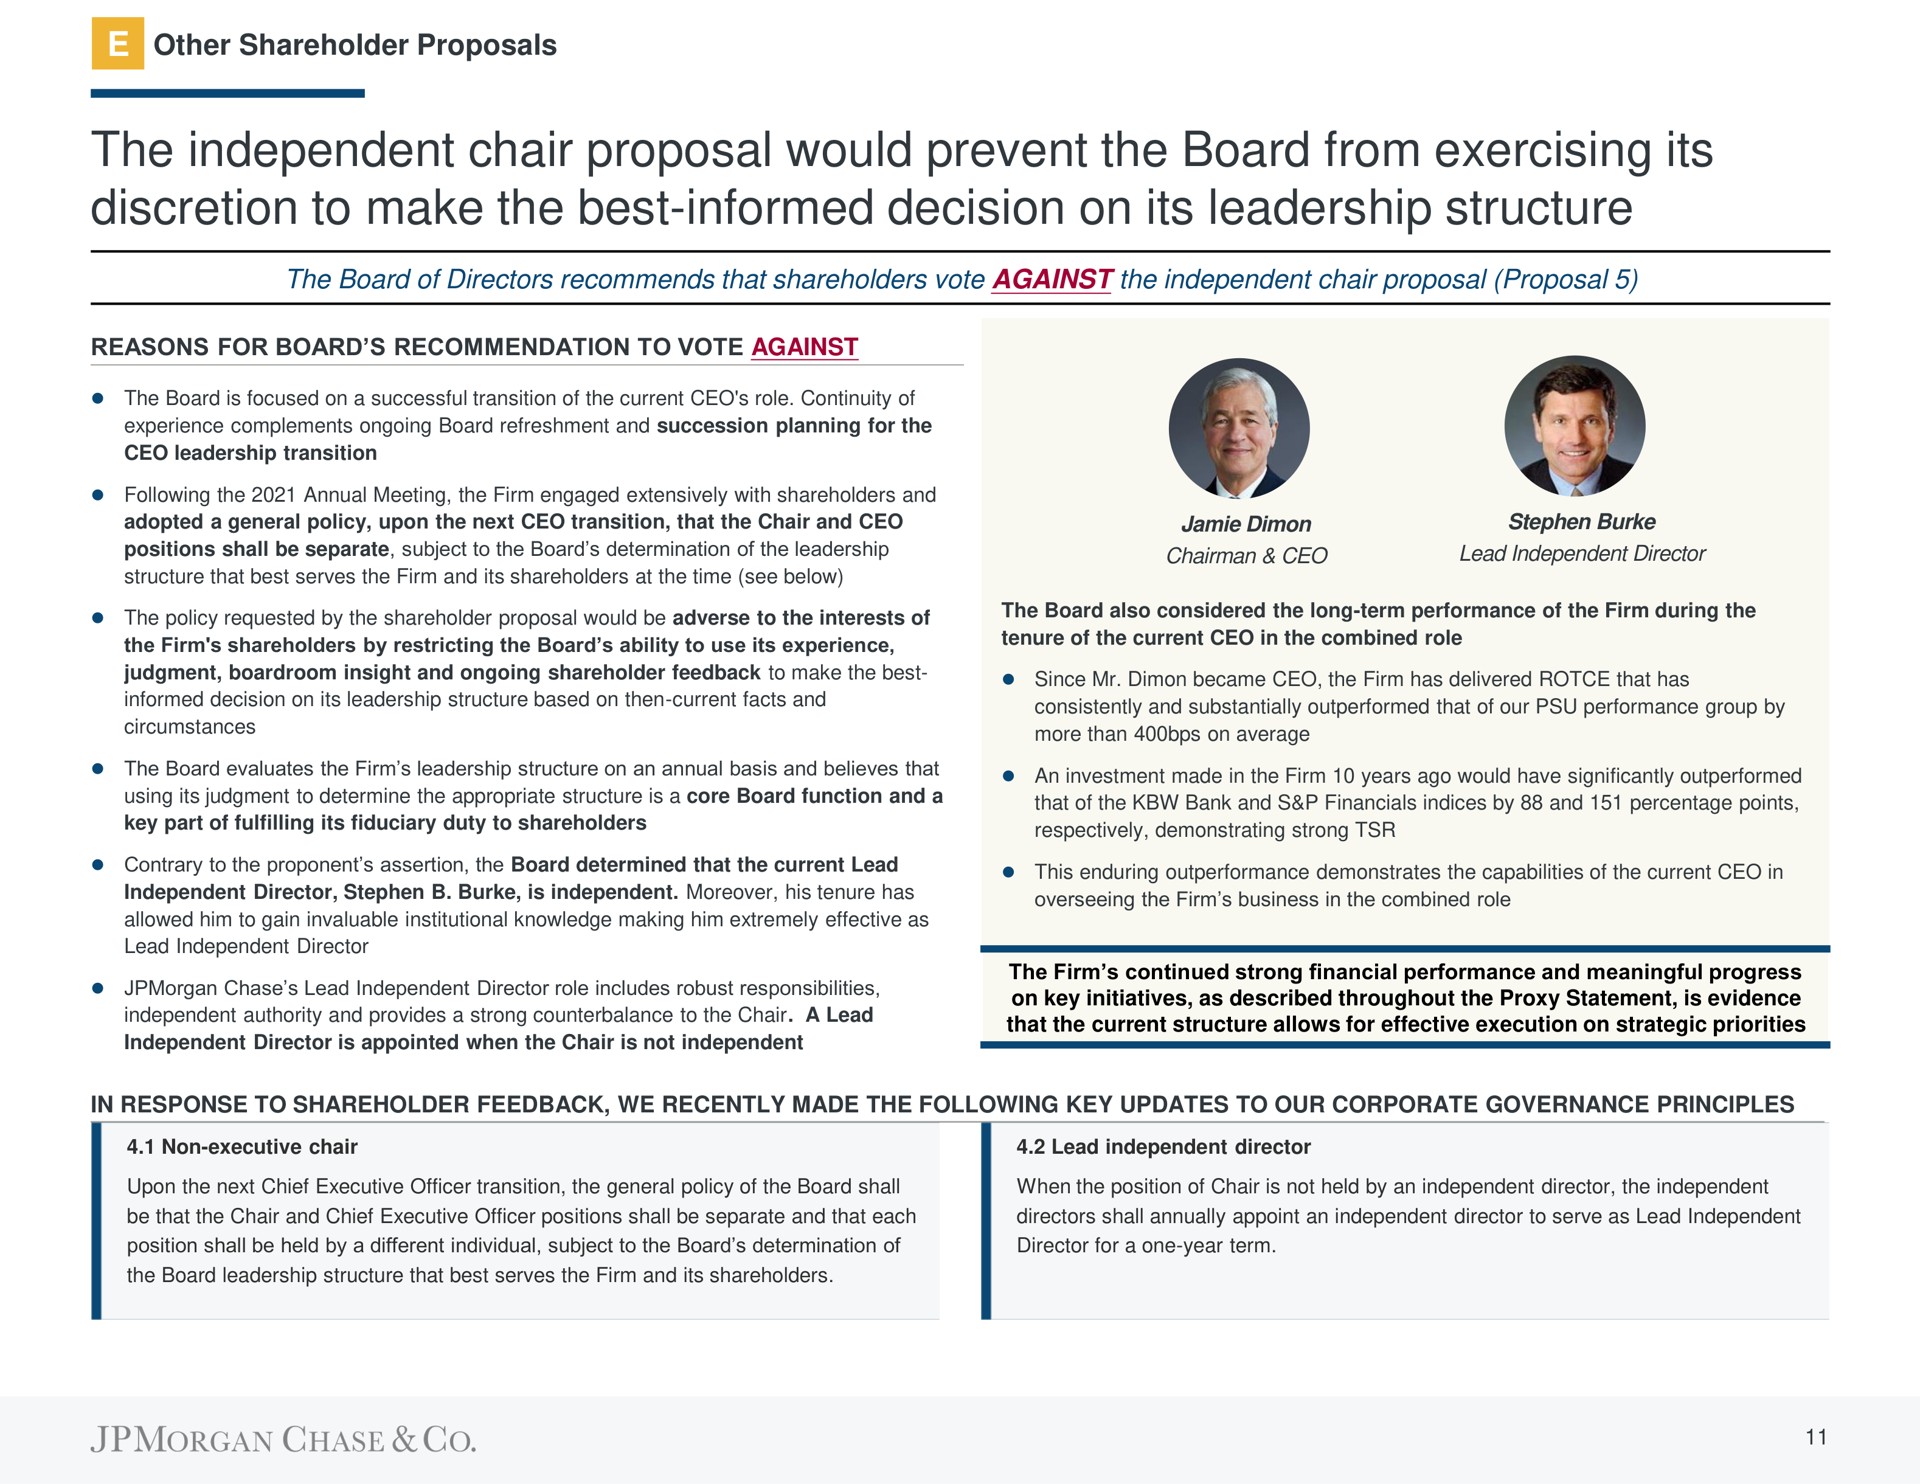 the independent chair proposal would prevent the board from exercising its discretion to make the best informed decision on its leadership structure | J.P.Morgan